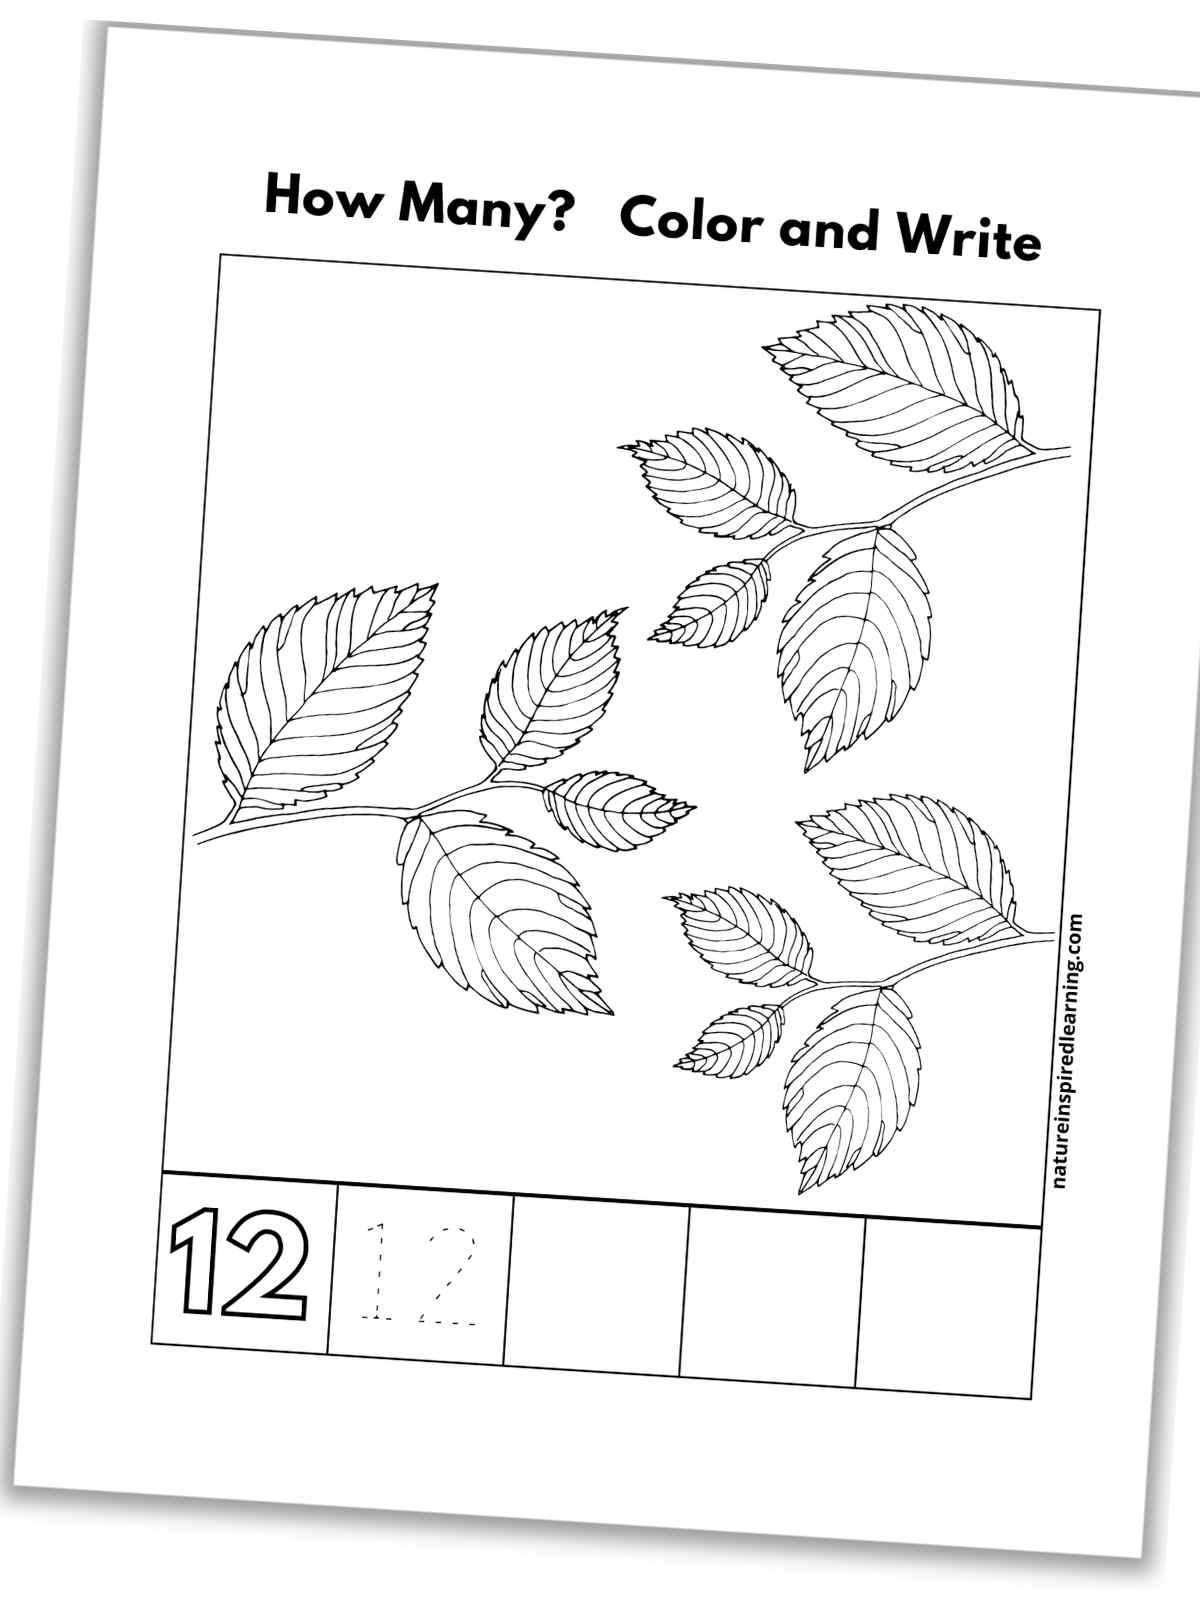 black and white number twelve worksheet with branches with leaves, outline of number 12, a traceable 12, and blank boxes slanted with a drop shadow